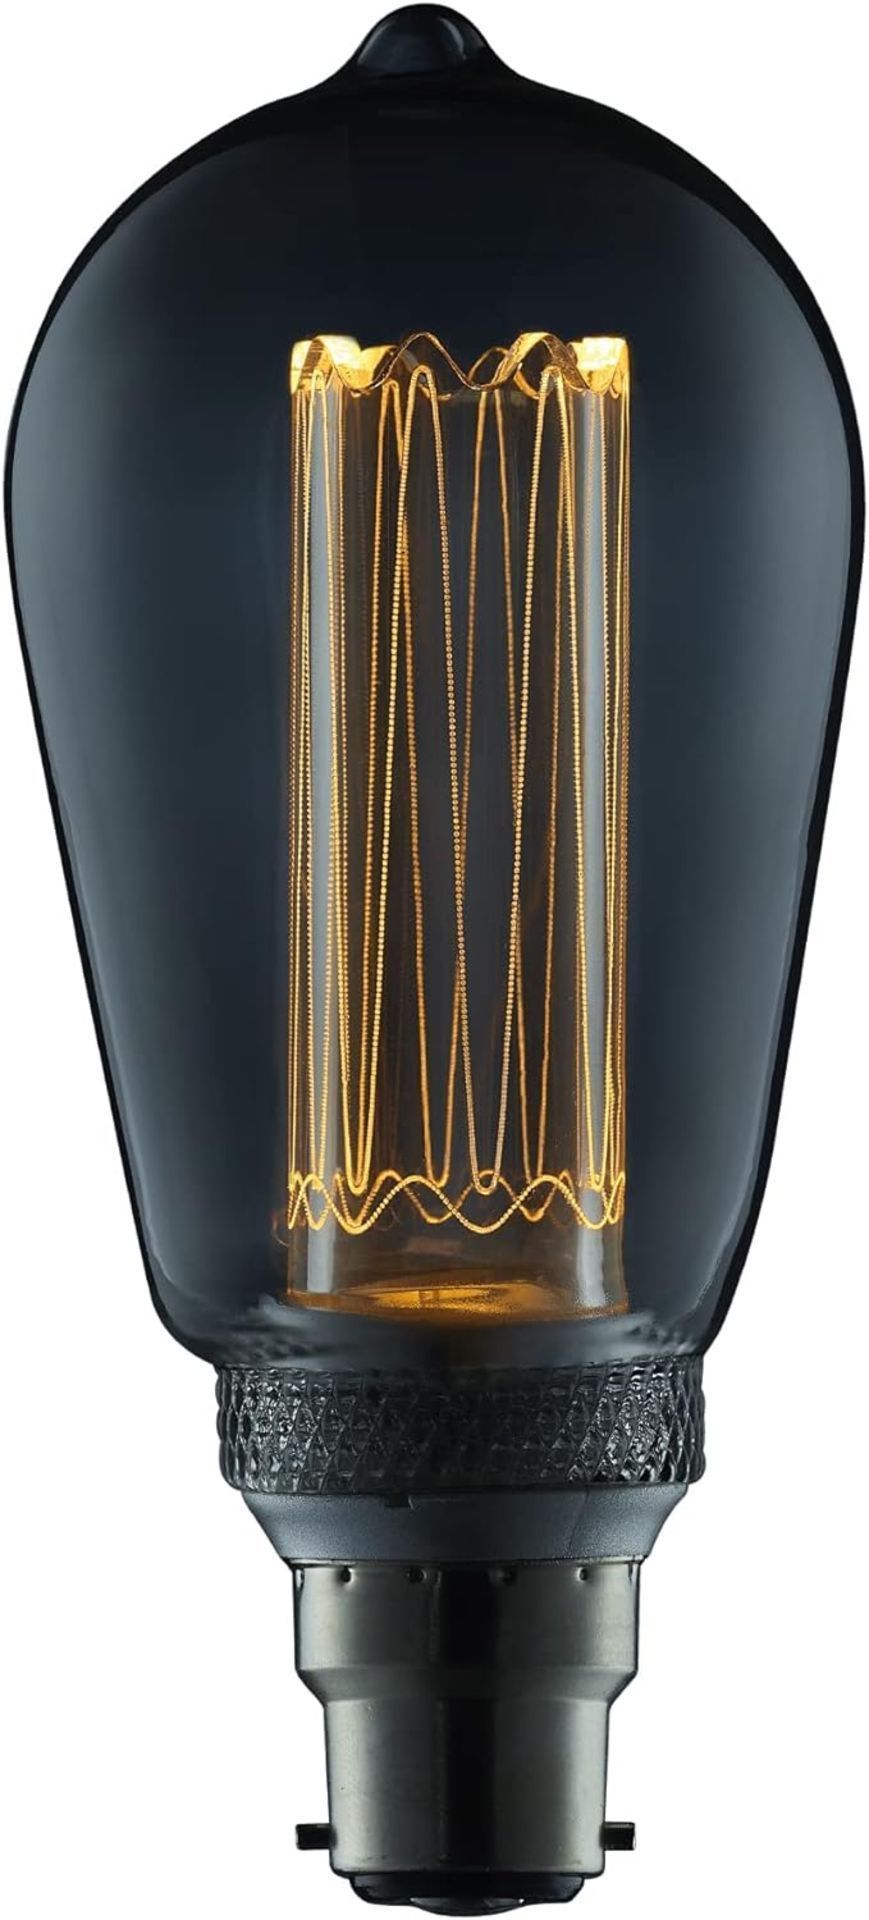 50 x Brand New TCP Decorative LED 100L ST64 4W B22/BC Non Dimmable 2000 Kelvin,Smoked Glass rrp £ - Image 3 of 3